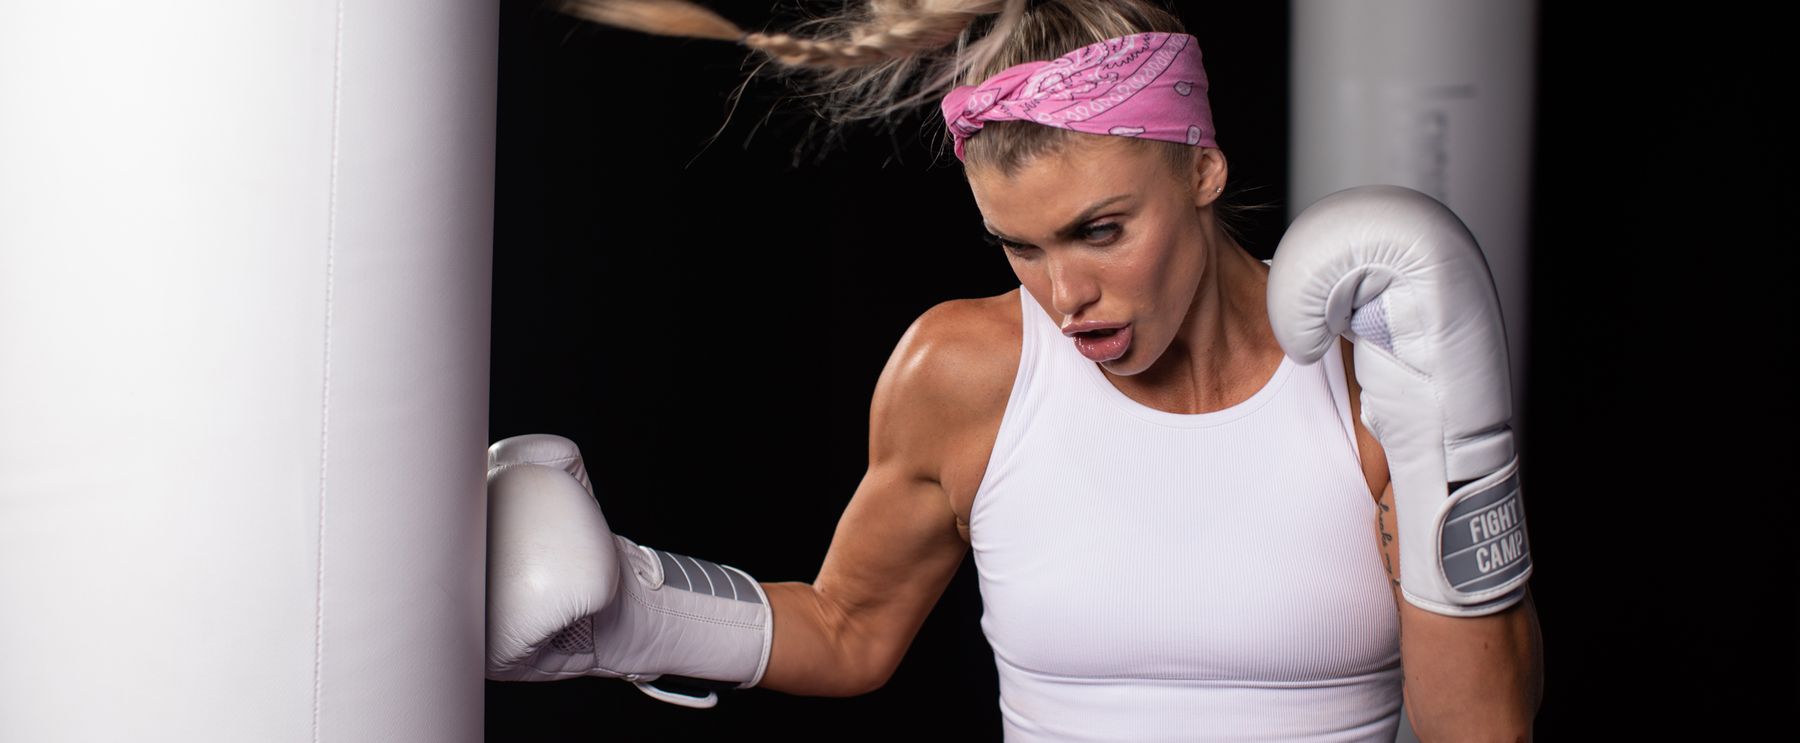 15-Minute At-Home Boxing Workout To Fight Stress